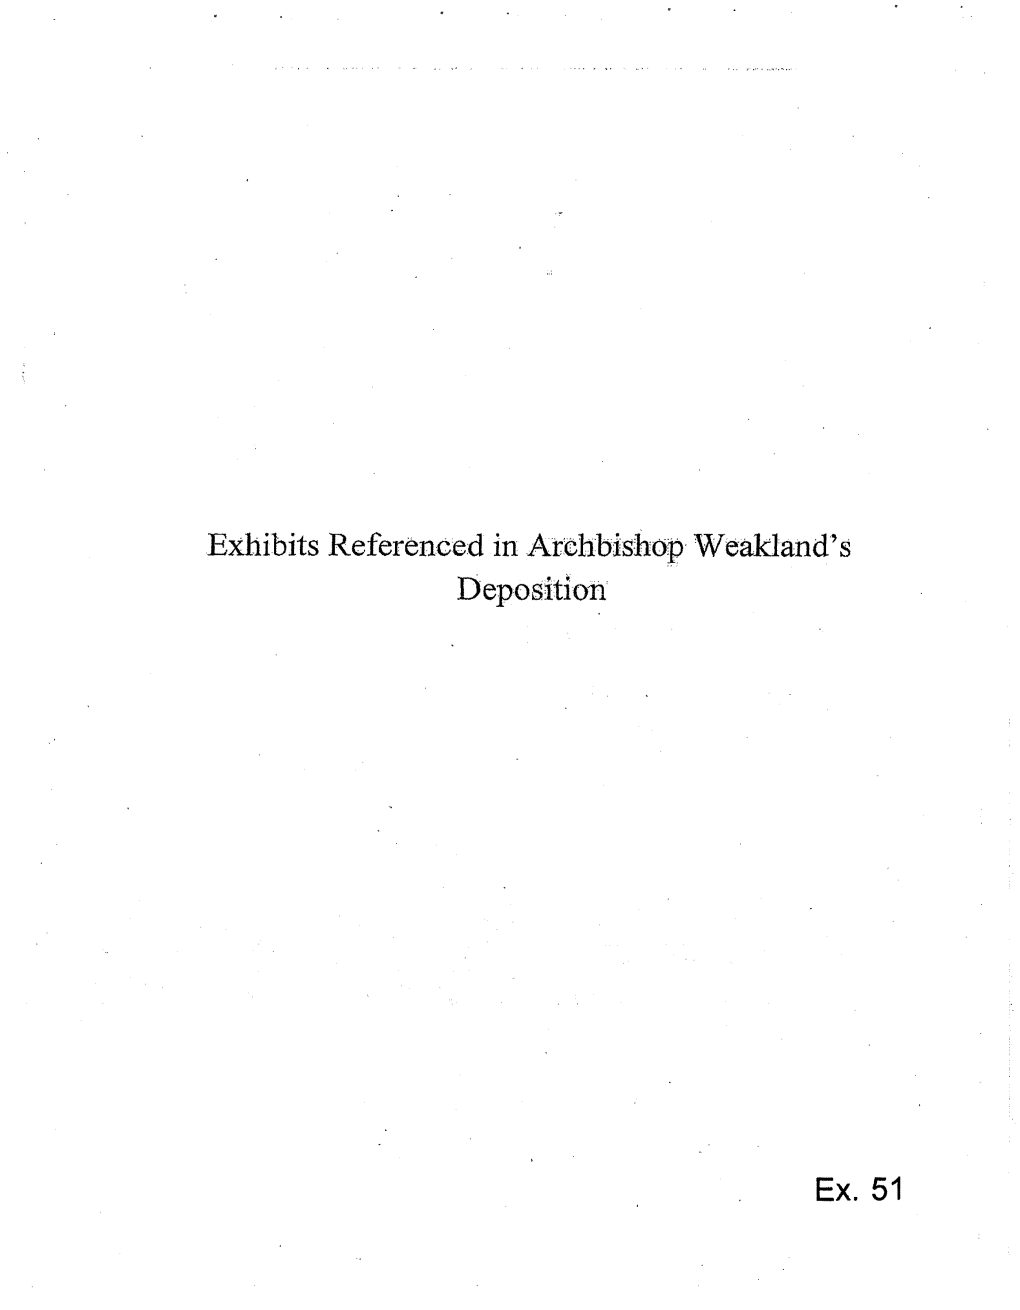 Exhibits Referenced in Archbishop Weakland's Deposition